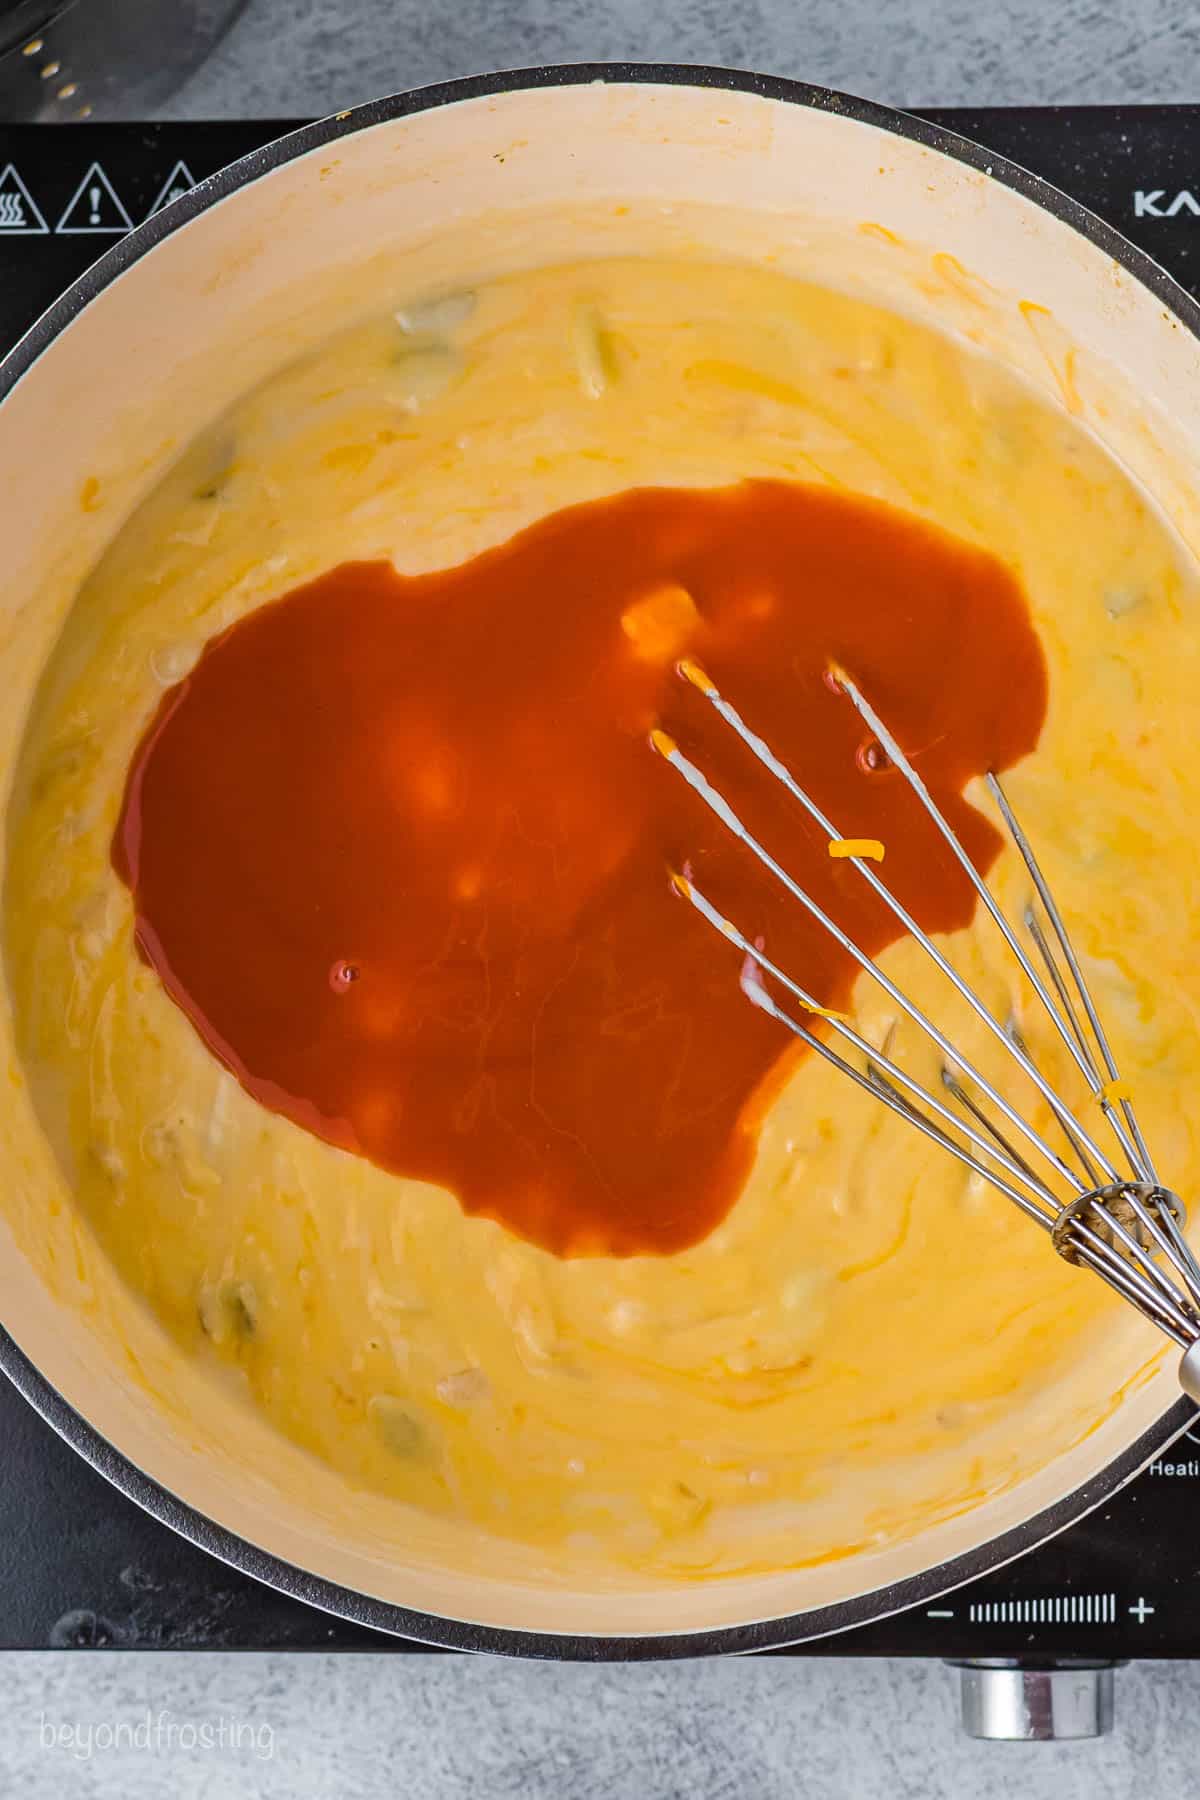 A whisk mixing Frank's hot sauce into a saucepan full of cheese sauce